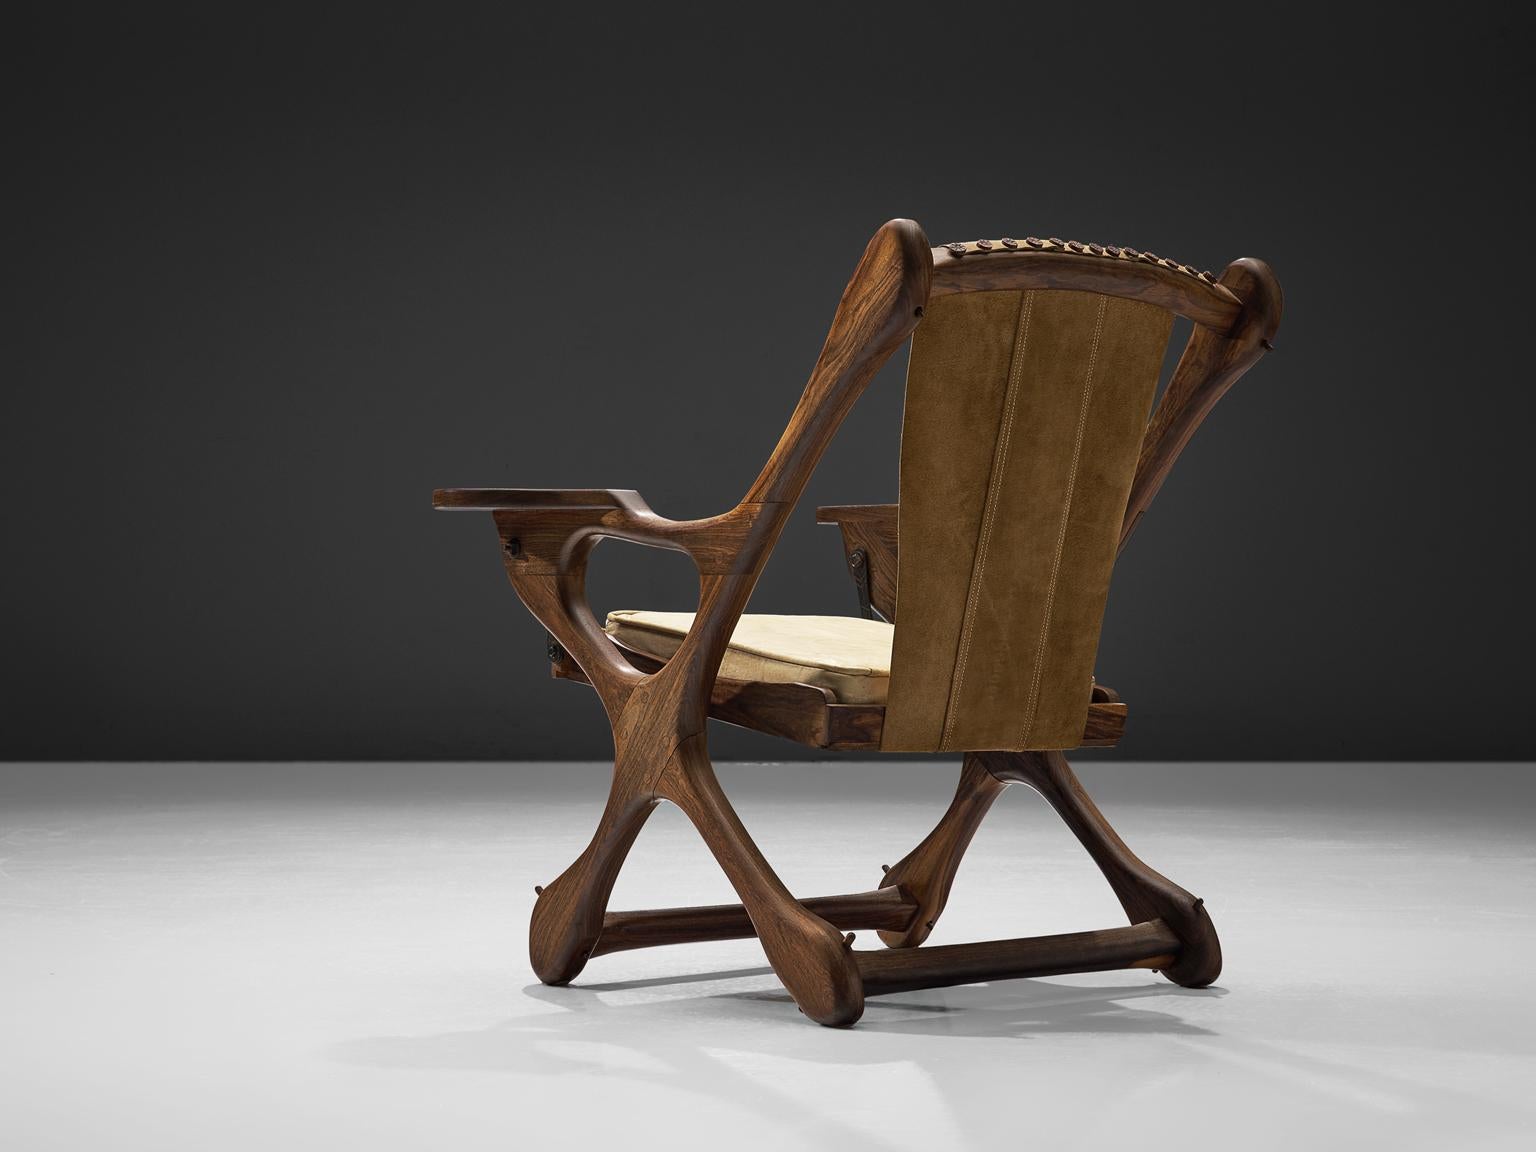 Don S. Shoemaker for Señal Furniture, lounge chair, cocobolo and beige leather, Mexico, 1960s. 

This iconic swinger lounge chair is executed in Cocobolo rosewood and leather. This sling chair has a characteristic organic shaped bone frame.